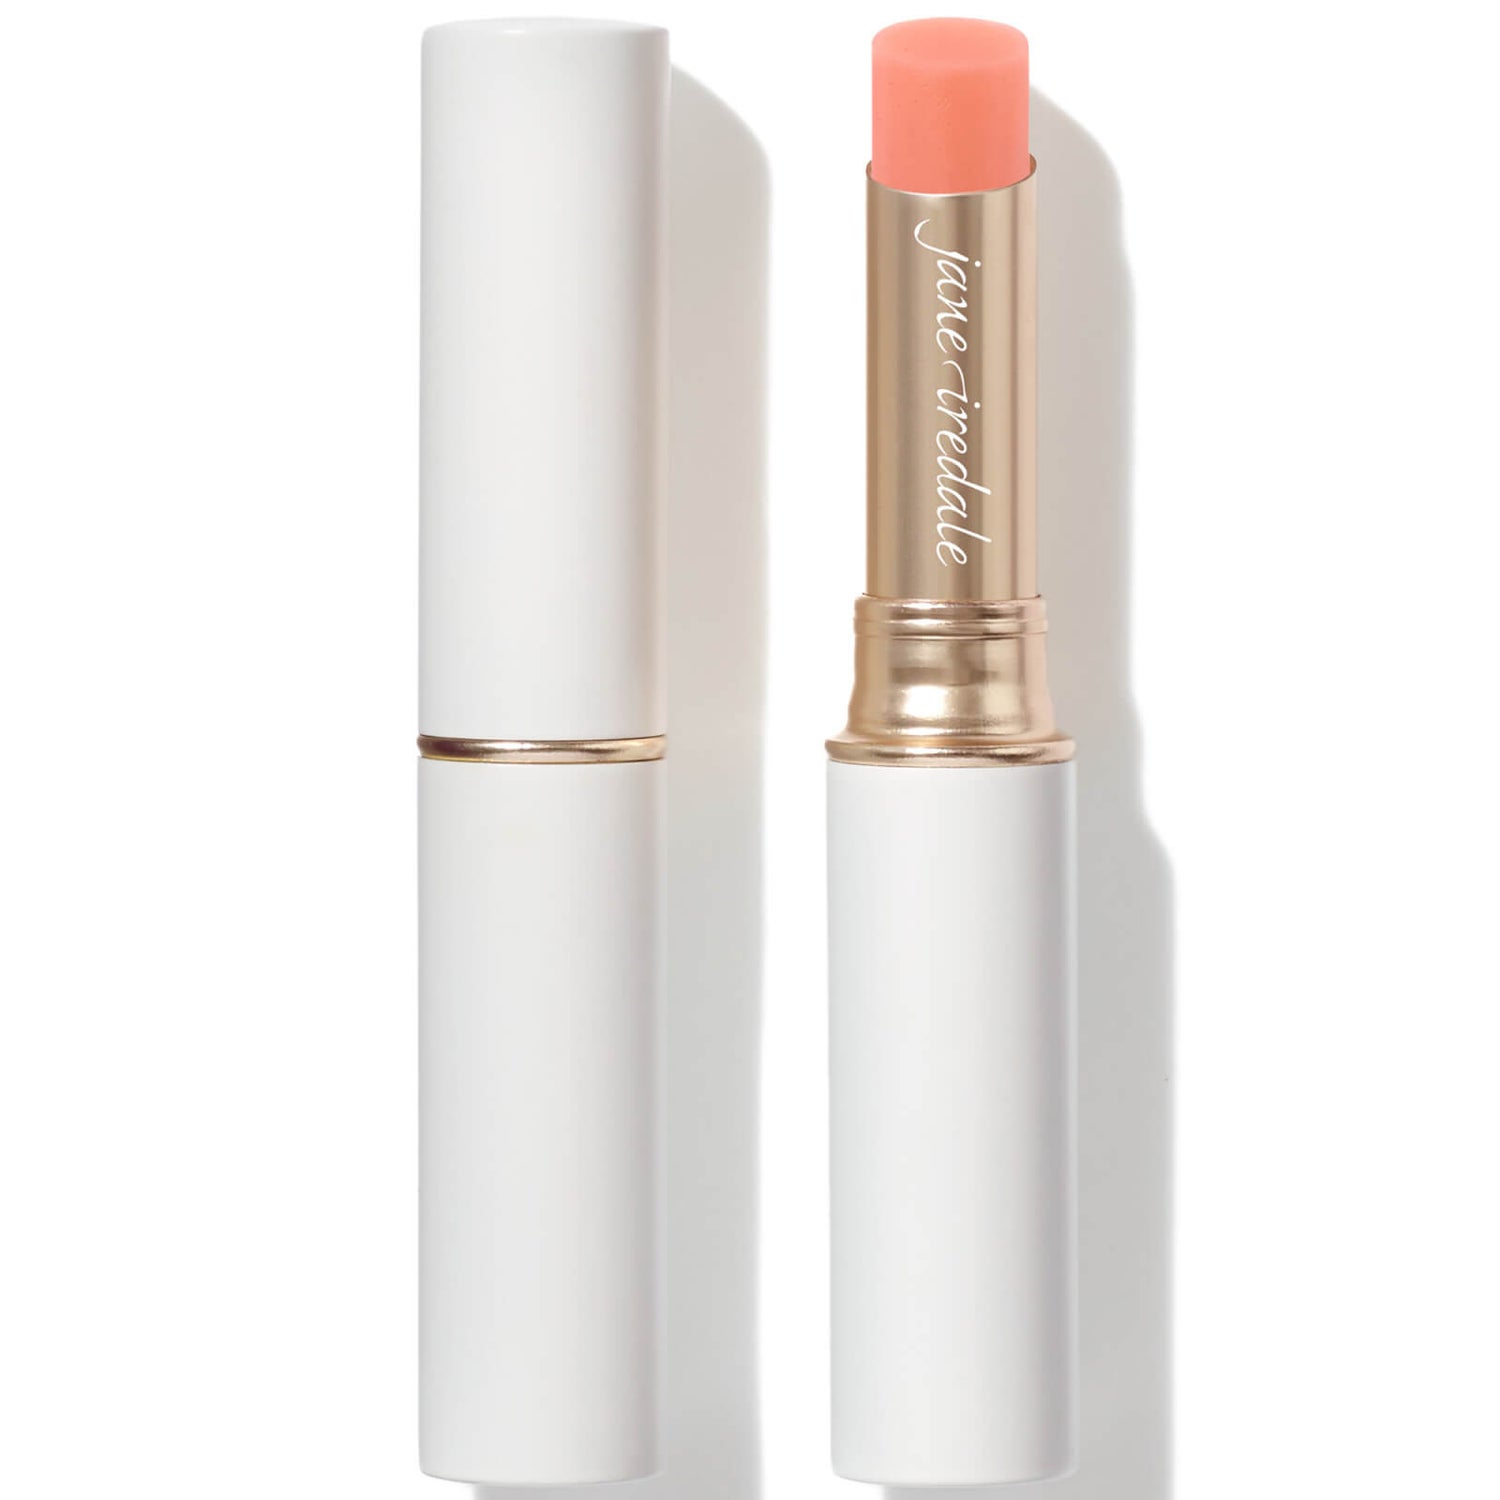 jane iredale Just Kissed Lip & Cheek Stain 3g (Various Shades)